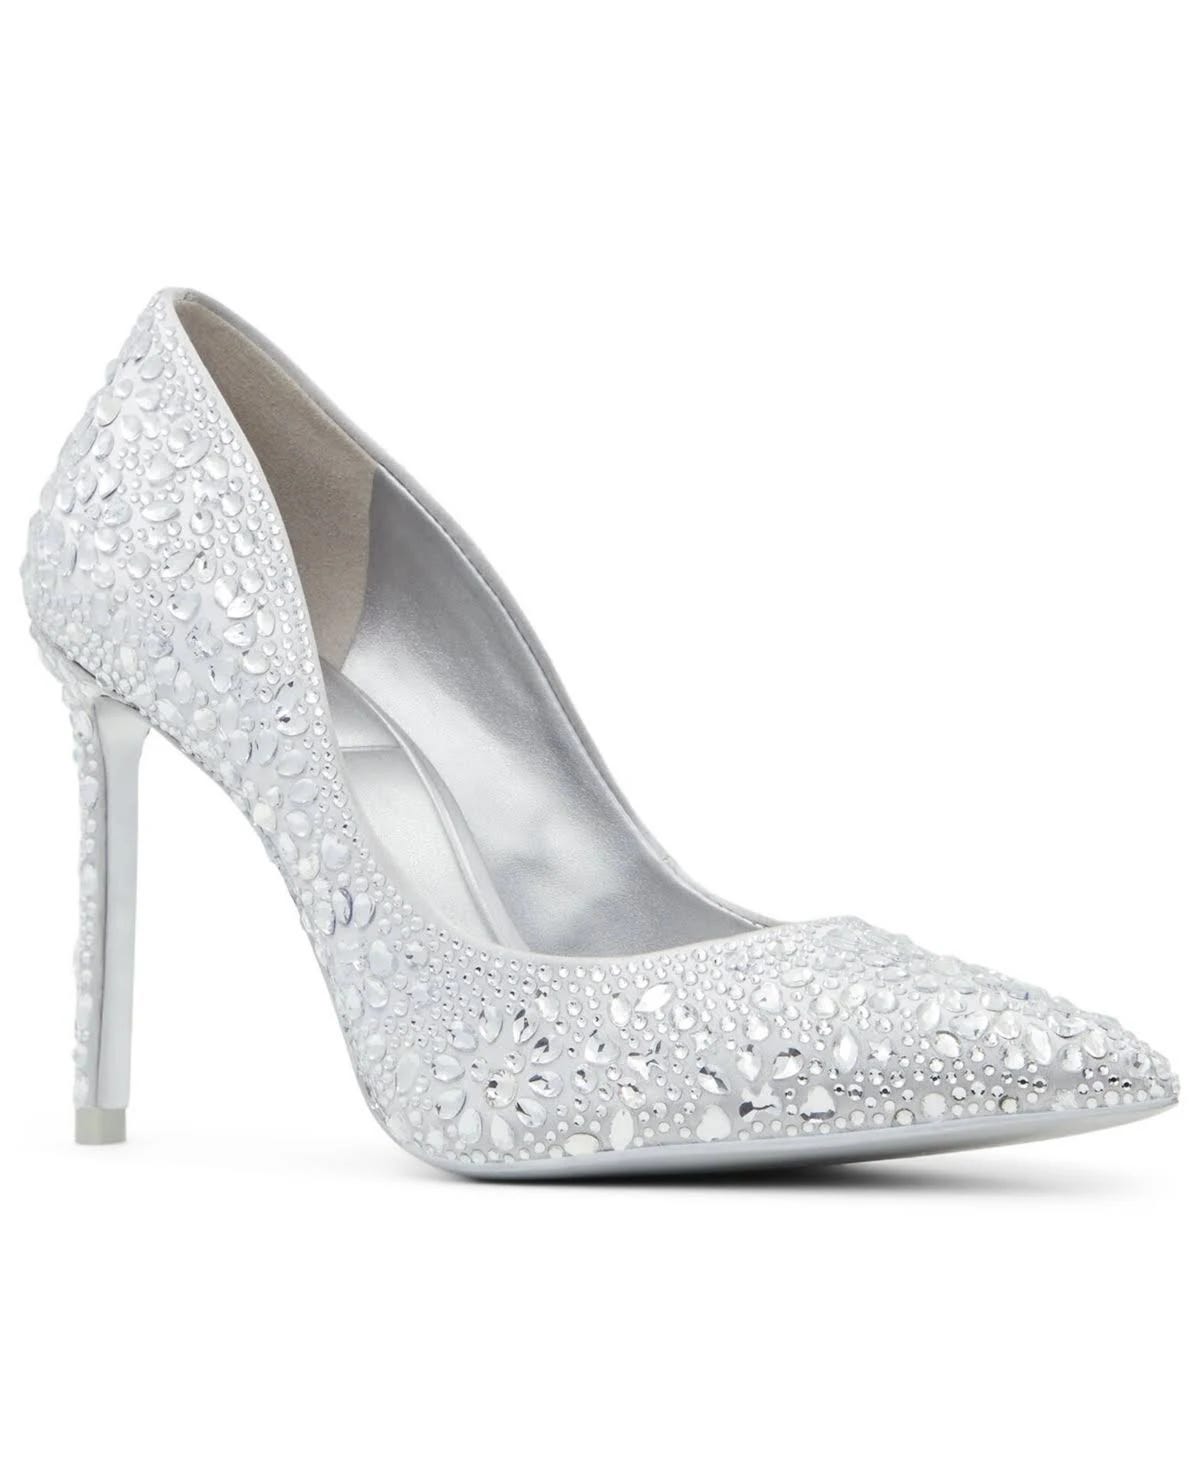 Shimmering Metallic Pointed Toe Heels with Mickey Mouse Accent | Image